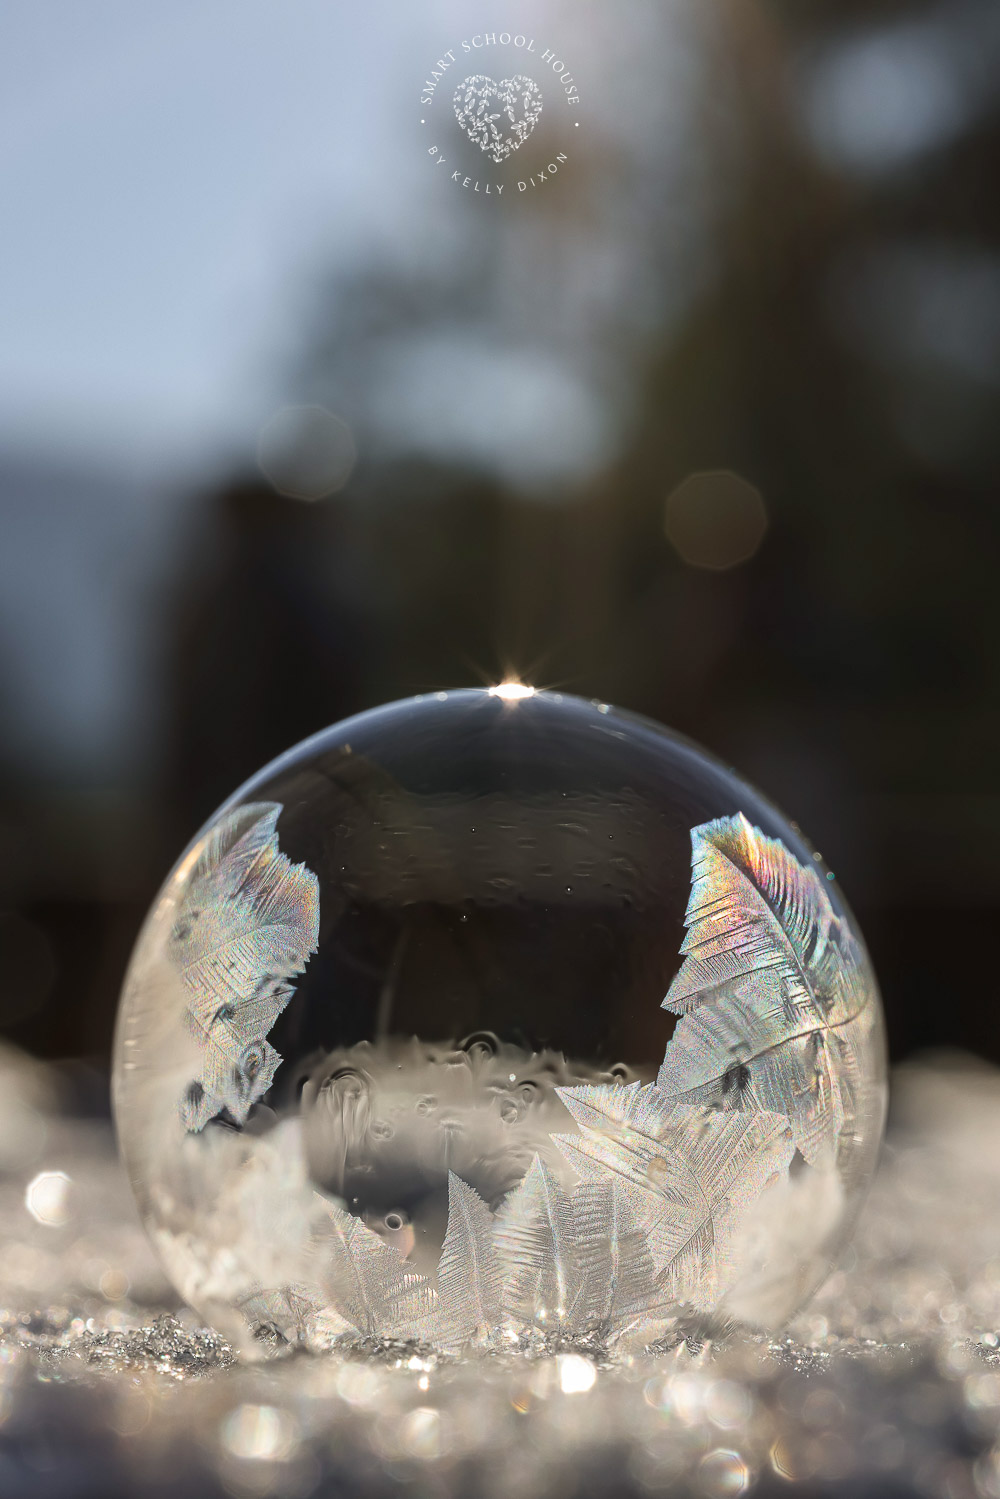 How to freeze bubbles outside! Make THE BEST frozen bubbles with this homemade bubble solution. Look at how beautiful these bubbles are!